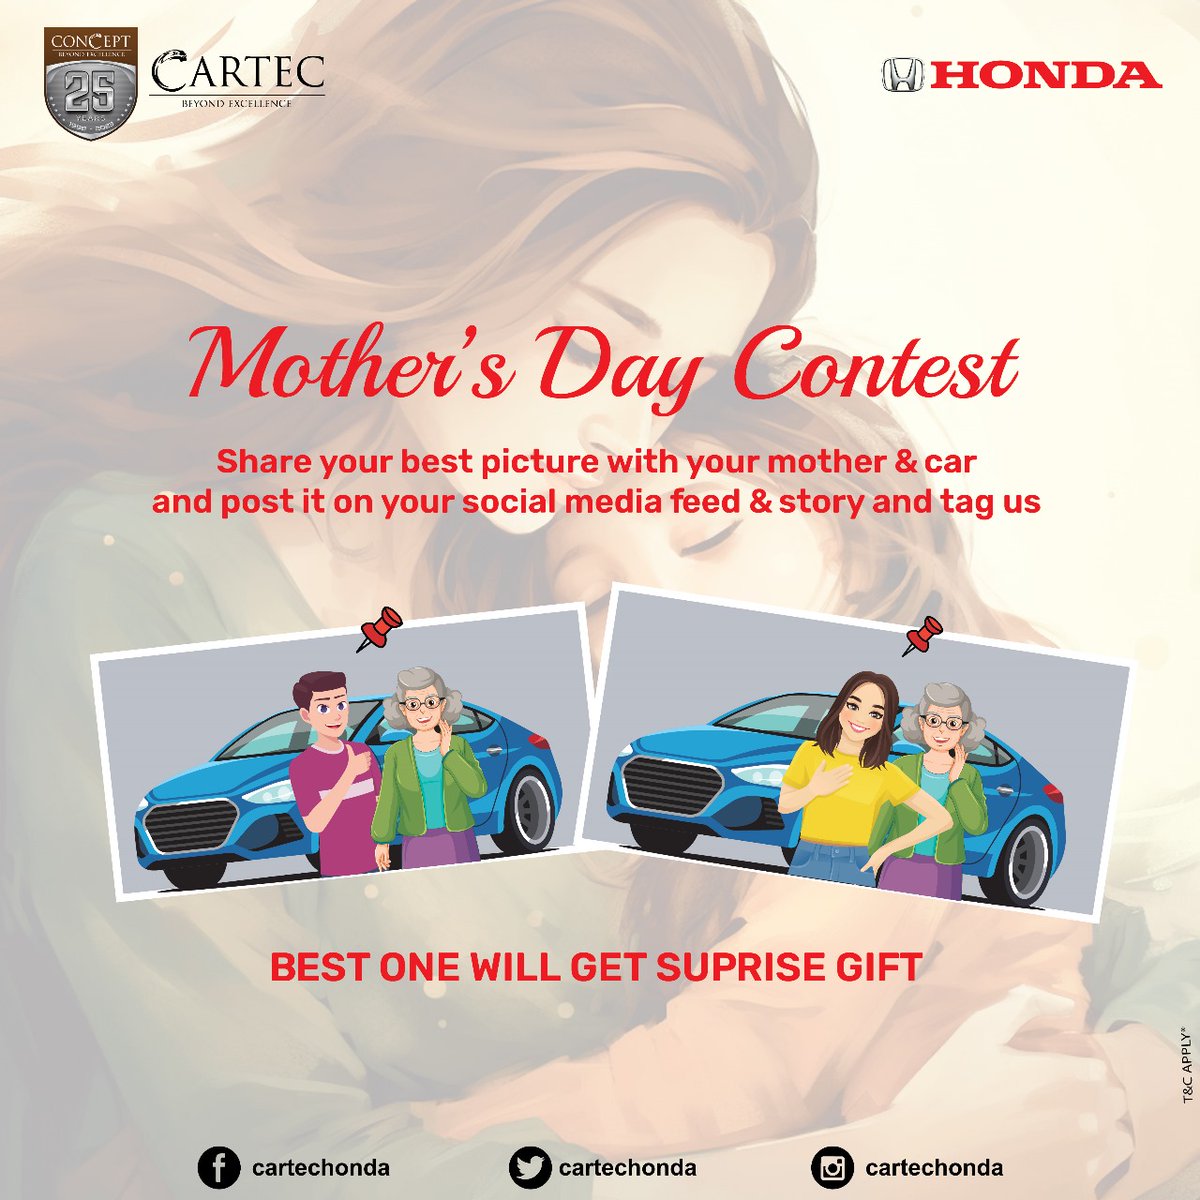 Mothers Day Contest!!! Capture a Moment of Pure Joy with your mother and Your Car! Share it on Your Feed & Story, Tag Cartec Honda,The Most Heartwarming picture wins a Special Surprise Gift! #CartecHonda #ConceptGroup #MothersDayContest #ContestTime #mothersdayspecial